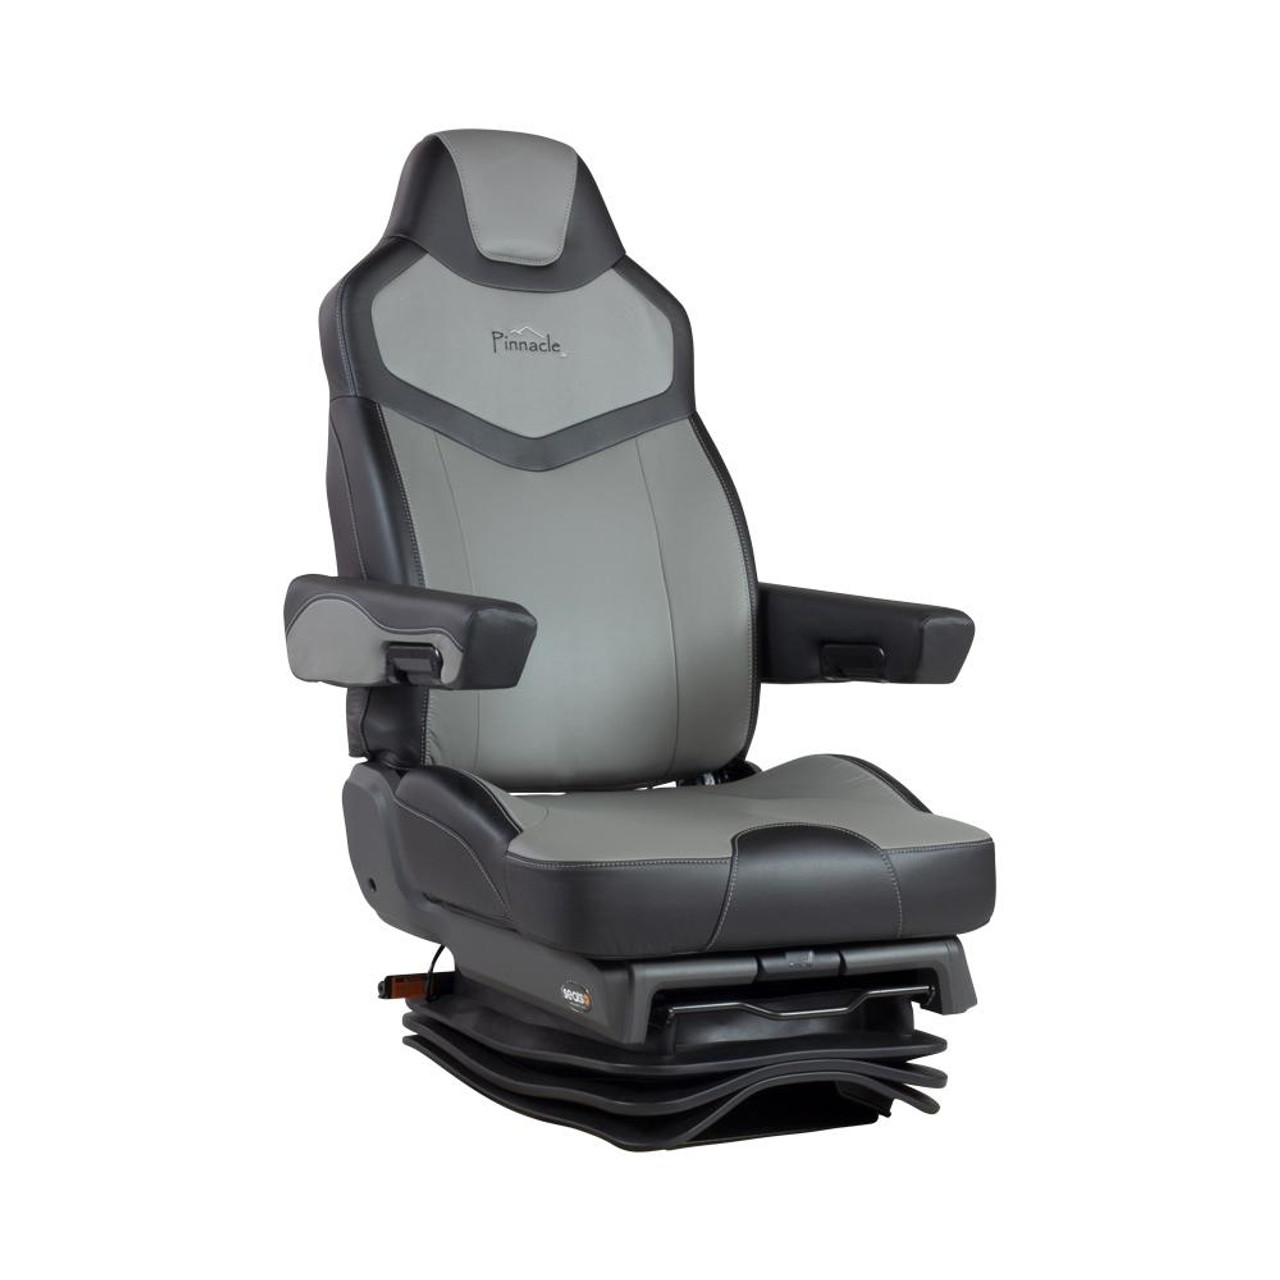 https://cdn11.bigcommerce.com/s-26fm838/images/stencil/1280x1280/products/1335/5721/Seats_Inc_Pinnacle_-_black_Grey_Leather_front-main__00337.1626281212.jpg?c=2?imbypass=on